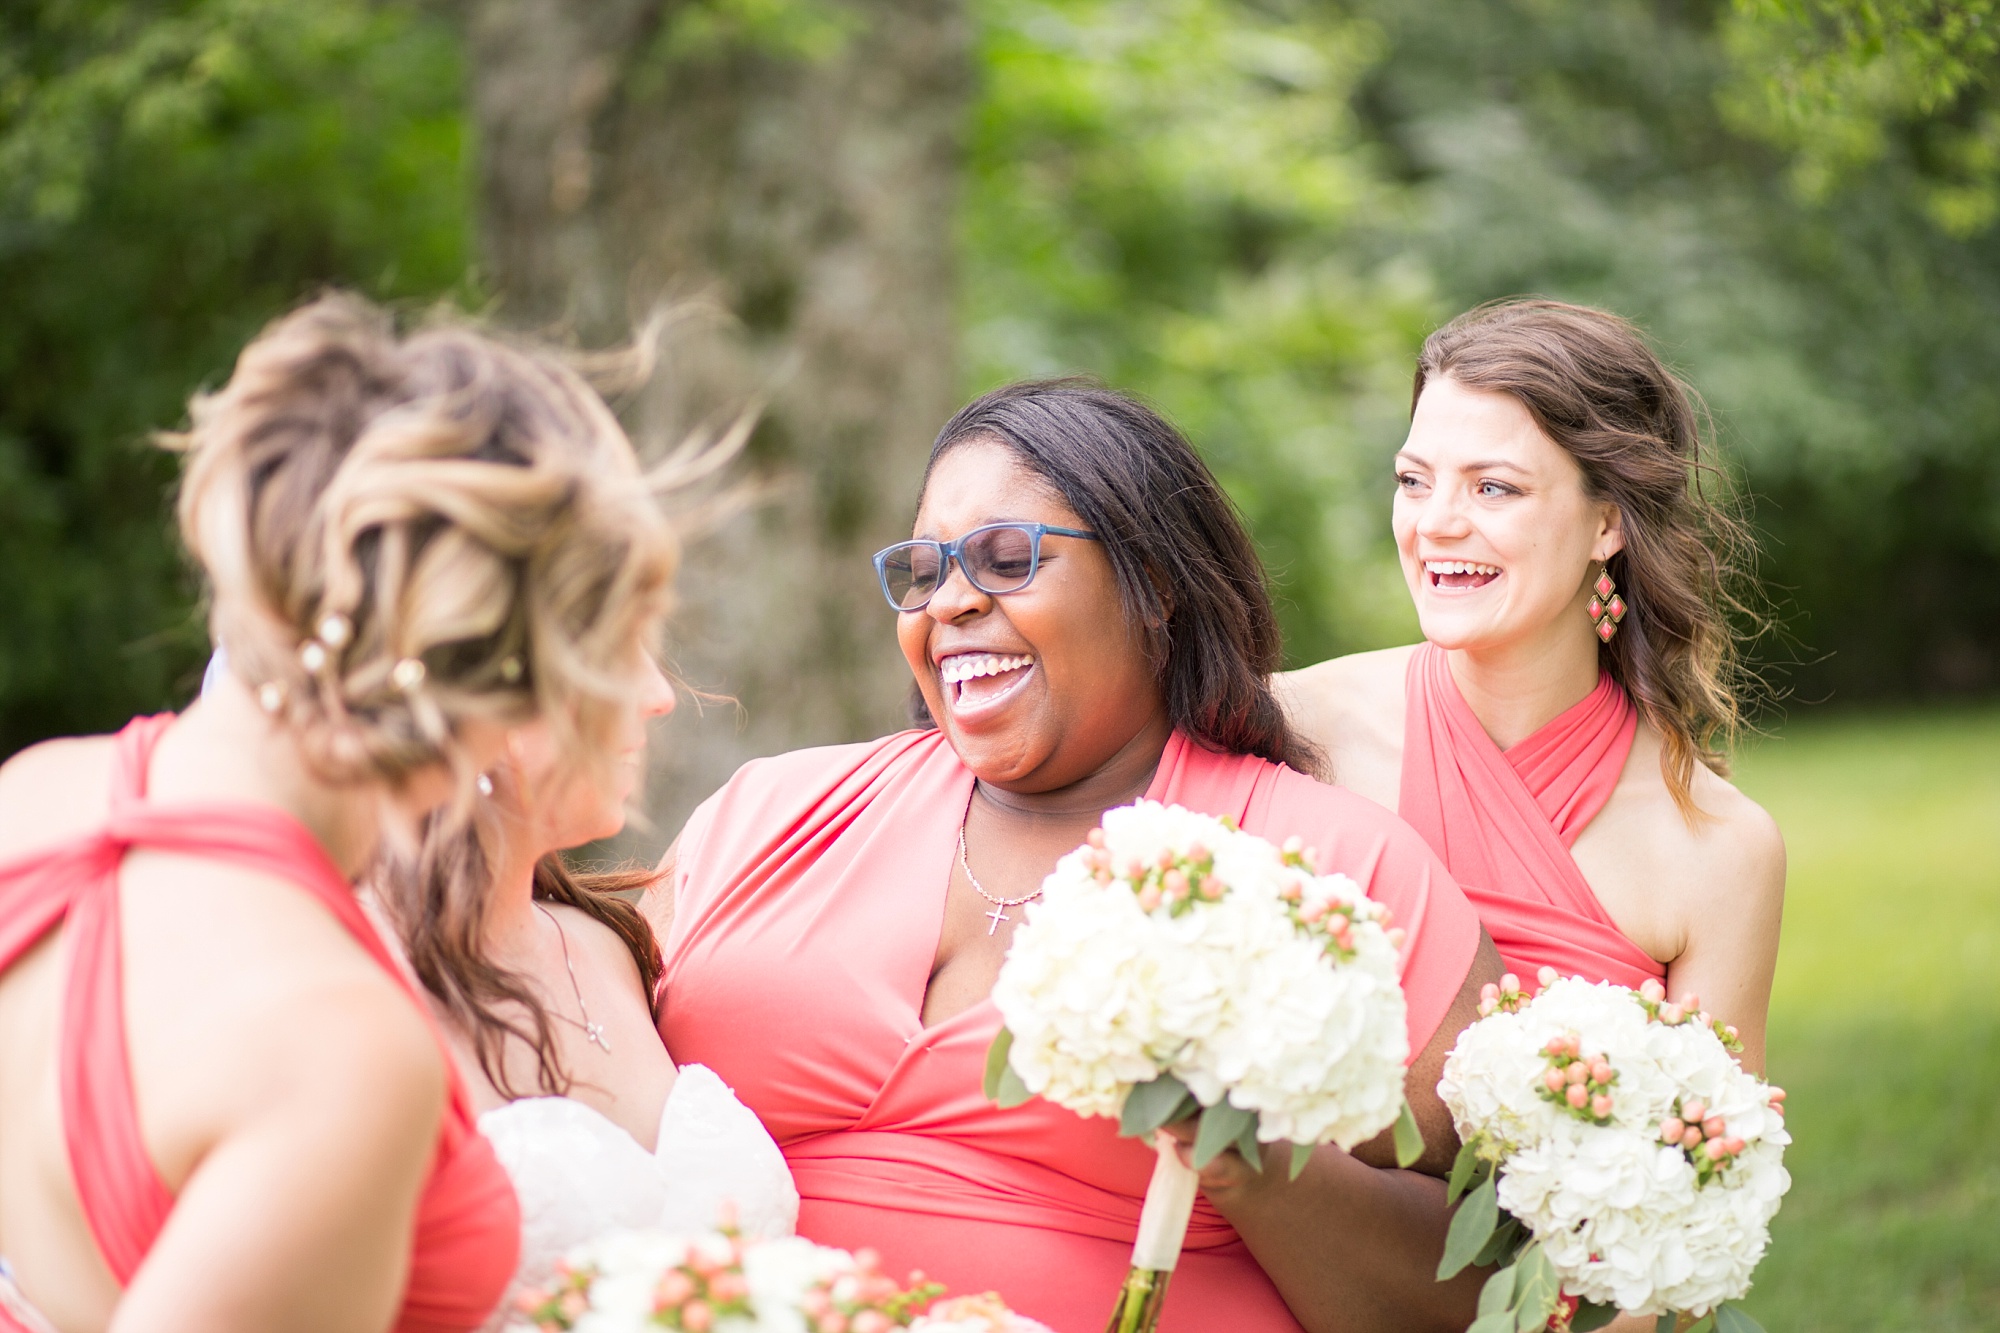 Coral & Gray Wedding at Grace Place church outside of Nashville Tennessee